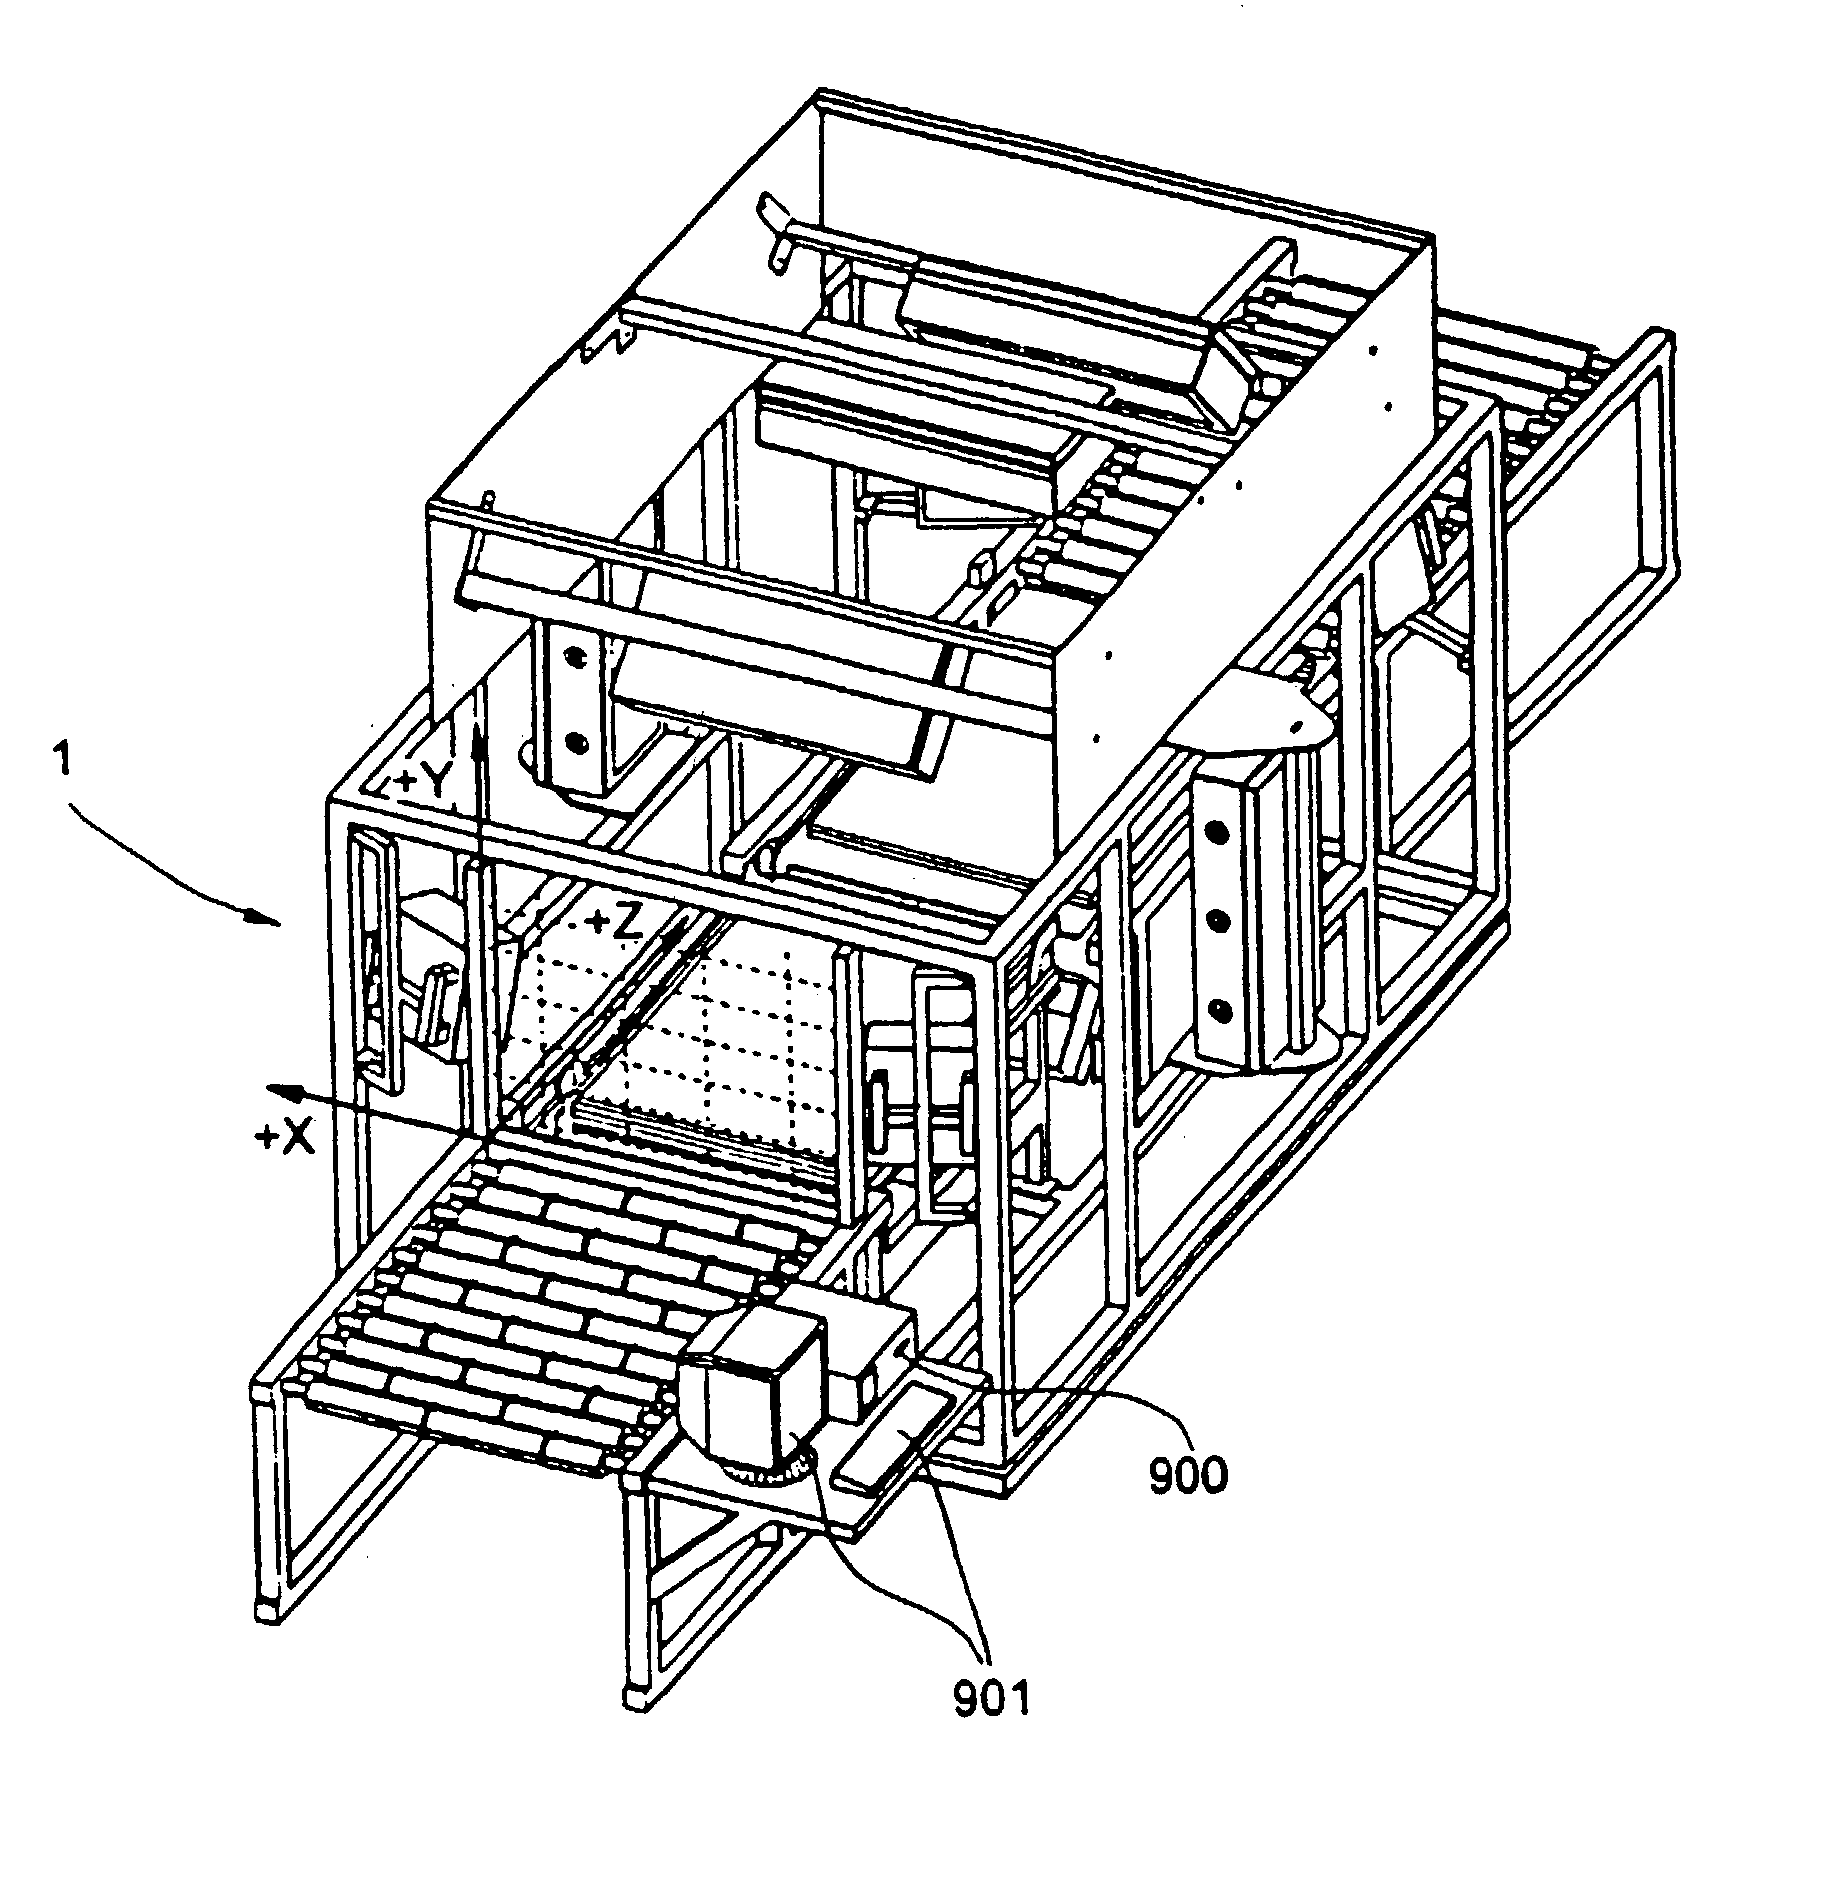 Automated system and method for identifying and measuring packages transported through a laser scanning tunnel